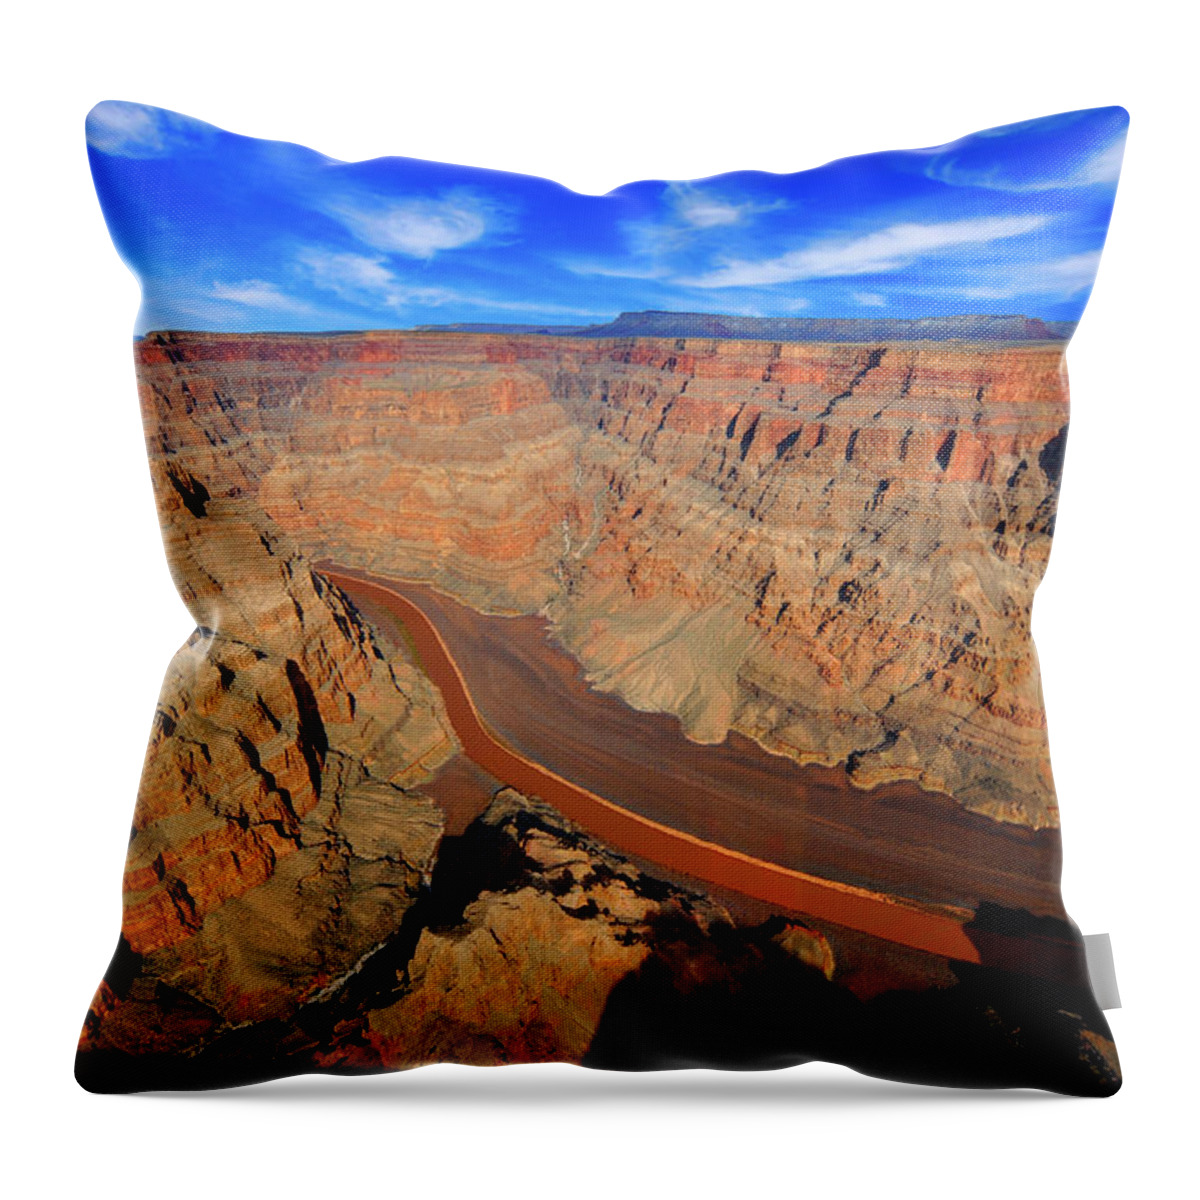 Scenics Throw Pillow featuring the photograph Grand Canyon & Colorado River by Photo By Prasit Chansareekorn